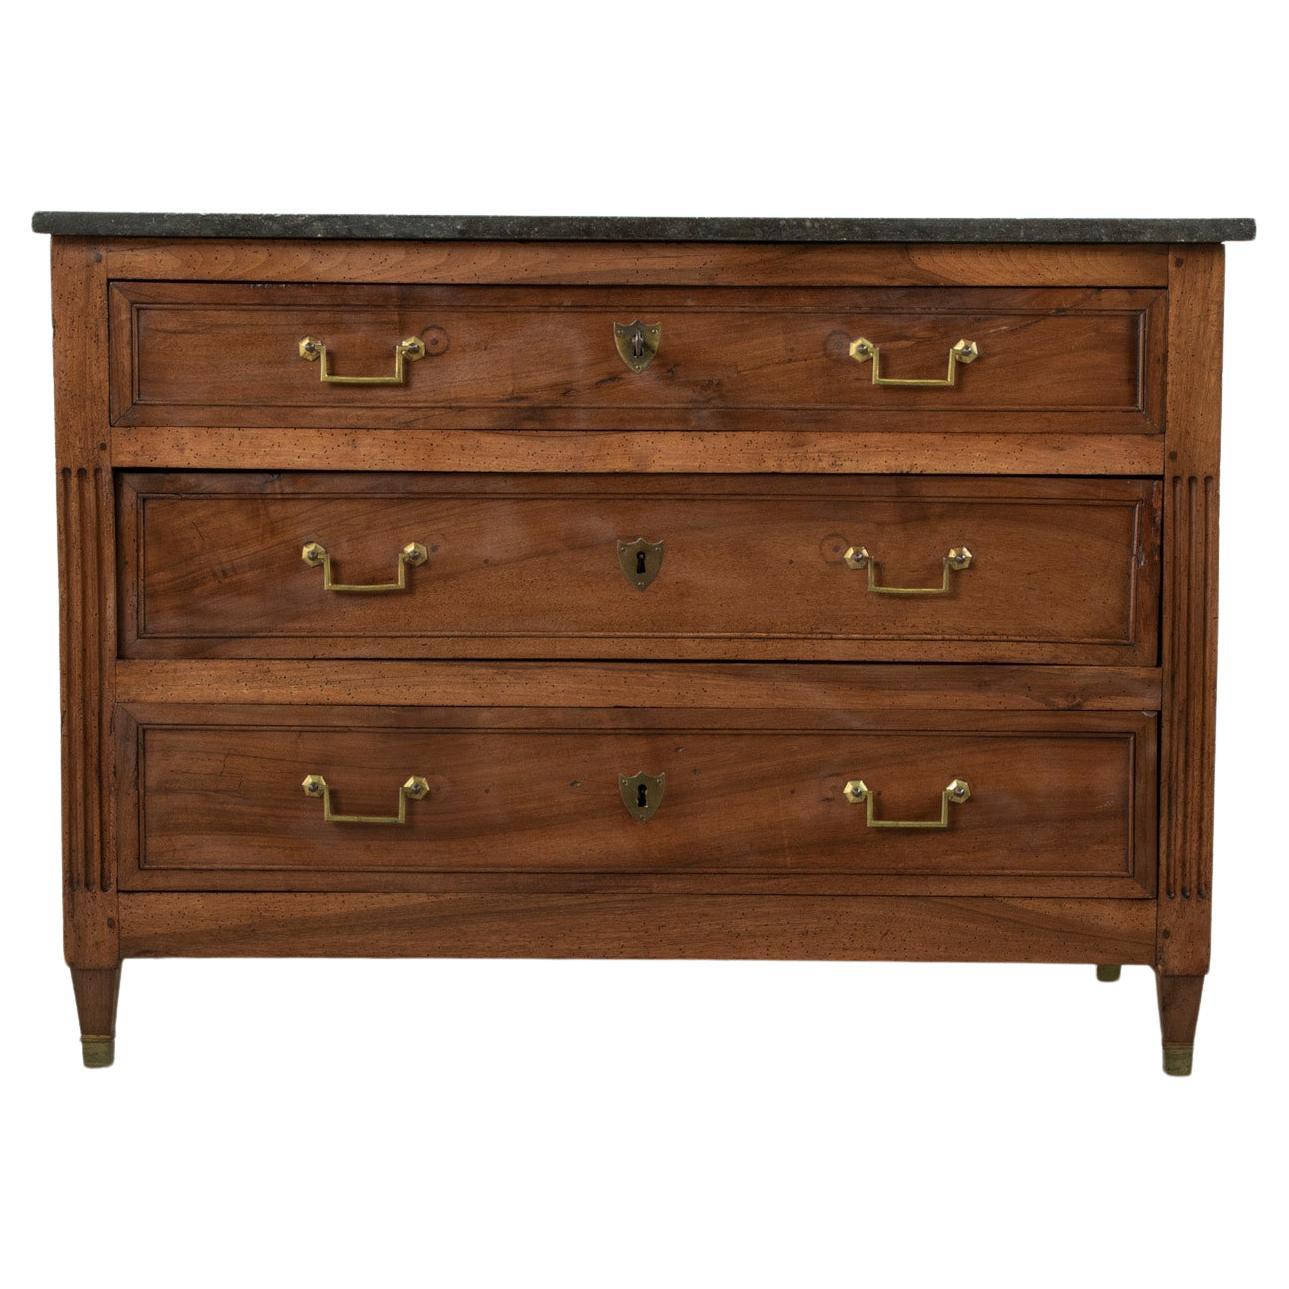 Late 18th Century French Louis XVI Period Walnut Commode or Chest, Marble Top